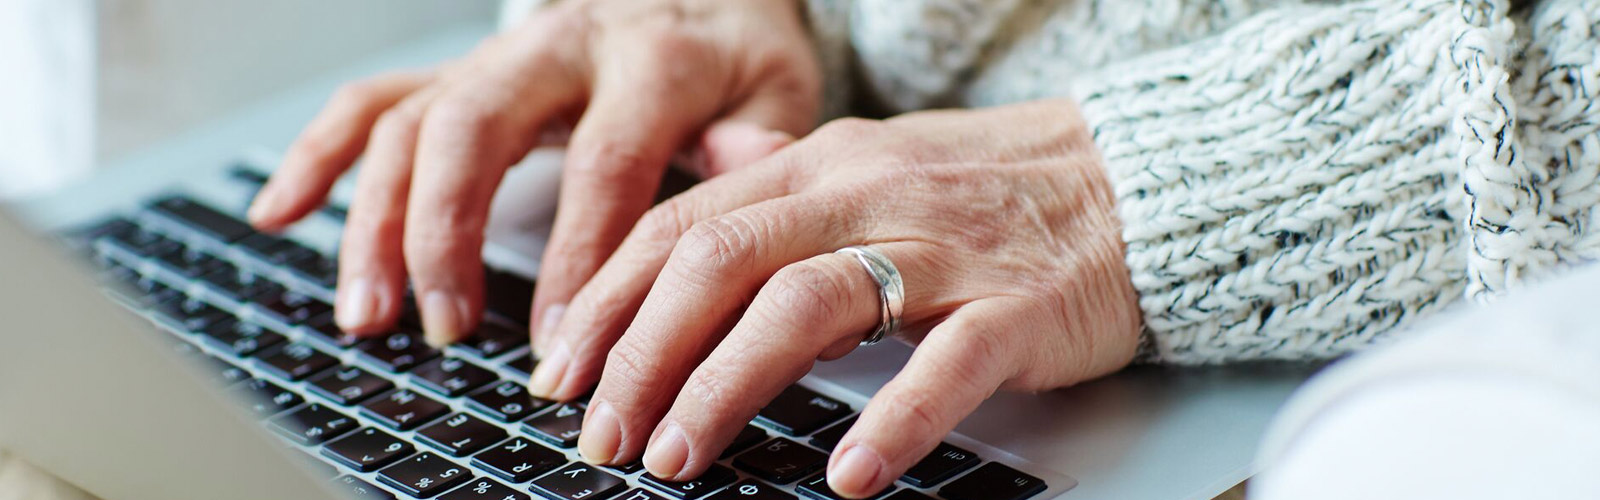 Image of hands typing on a keyboard.